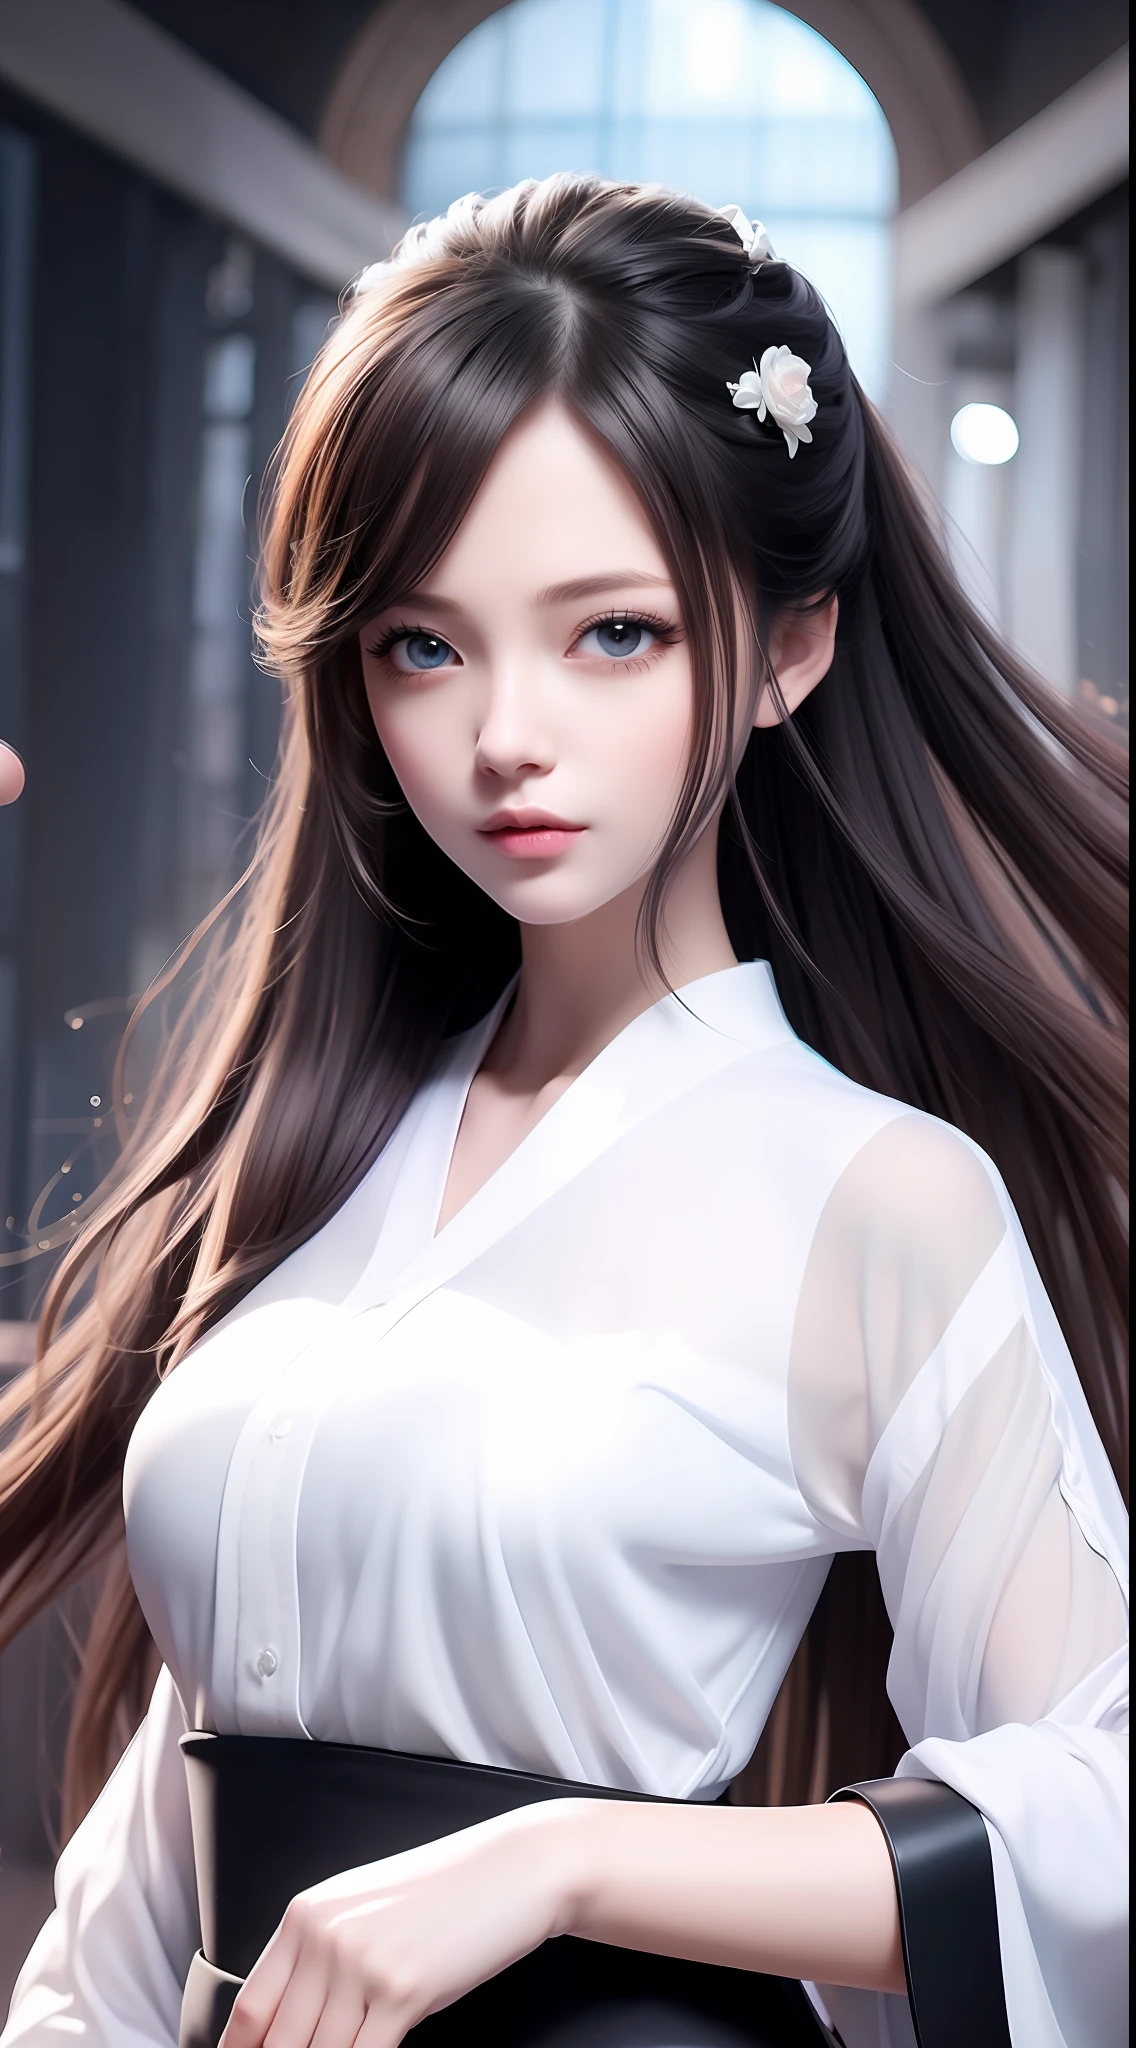 4k ultra hd, masterpiece, very high quality, a girl, age 20 years old girl, good face, smooth face, detailed eyes, beautiful hair, very long hair, hair band, cute look, modern clothes, pink shirt, black  jeans, good shoes, morning background, buildings, sun lights, clear weather, stylish looking,